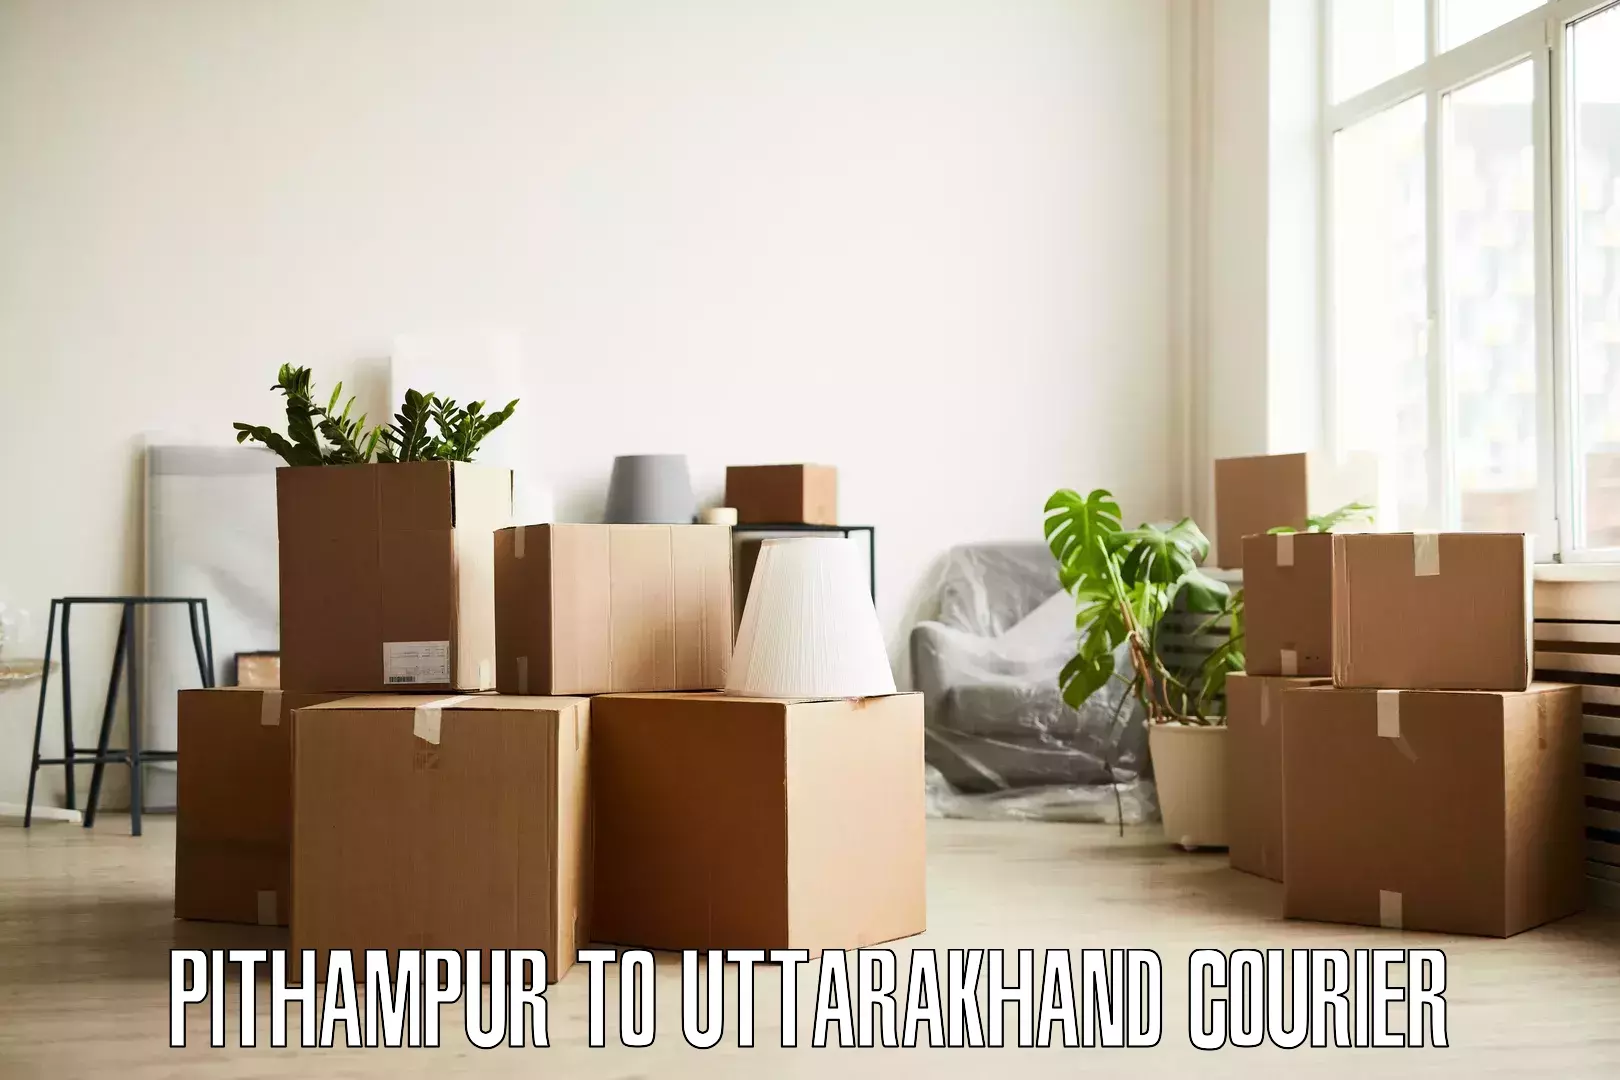 Trusted relocation experts Pithampur to Dehradun